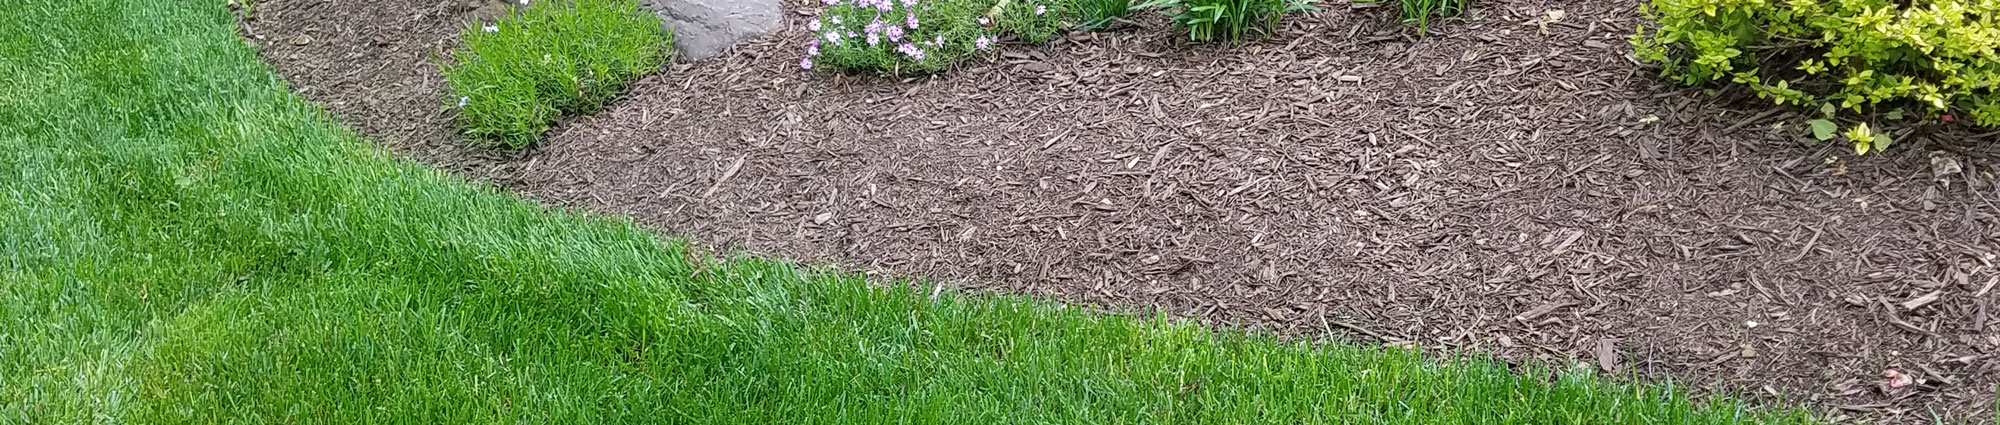 A close up of some grass and mulch